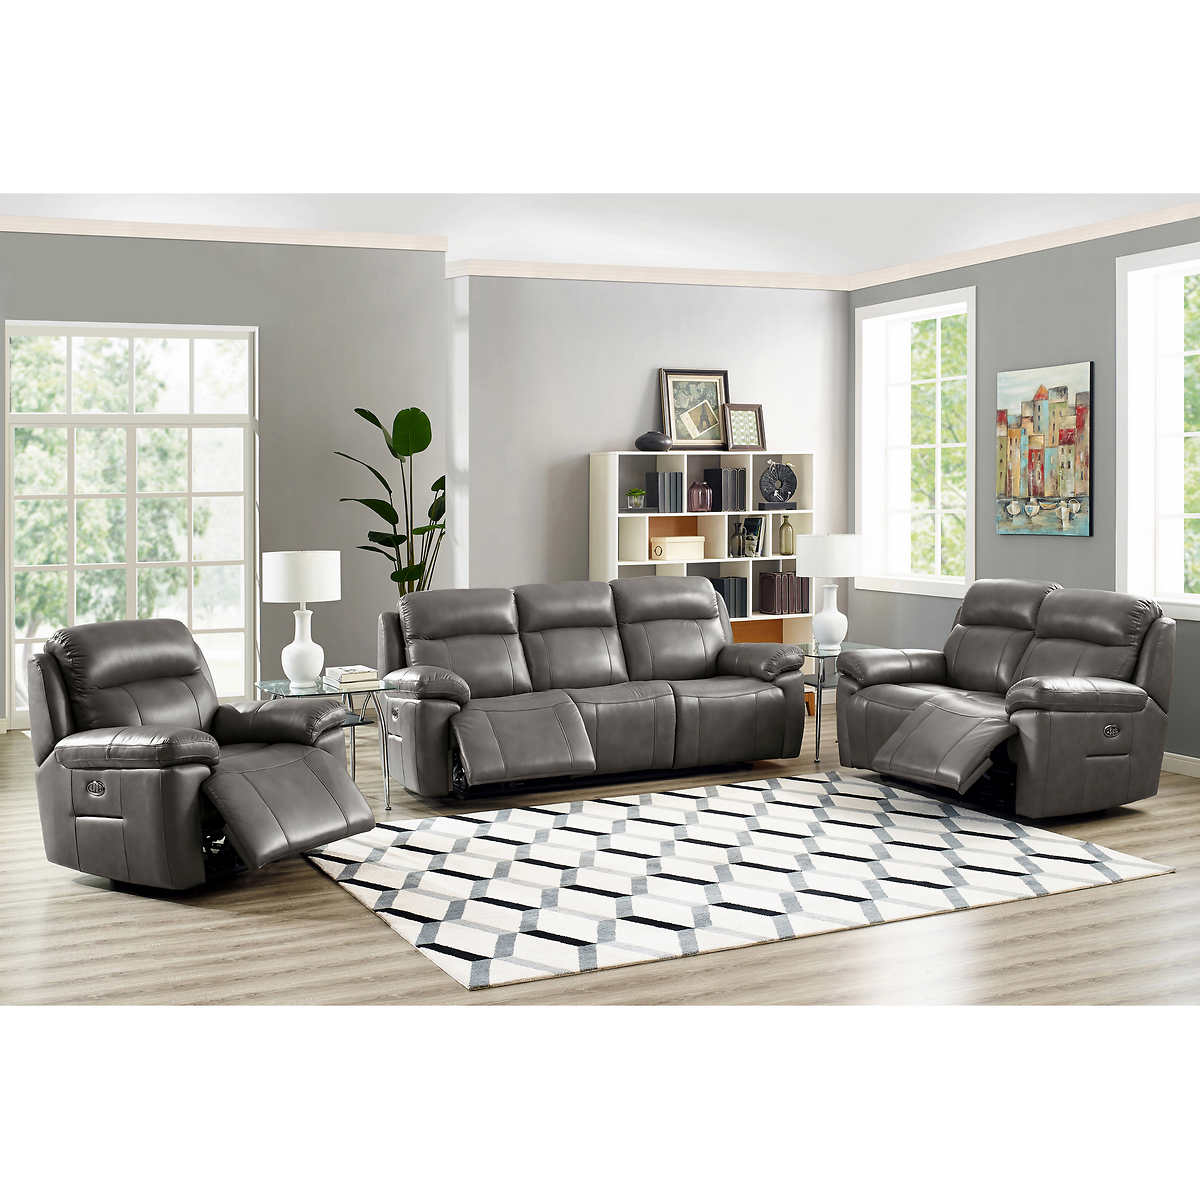 Atticus 3 Piece Leather Set With Power Recline